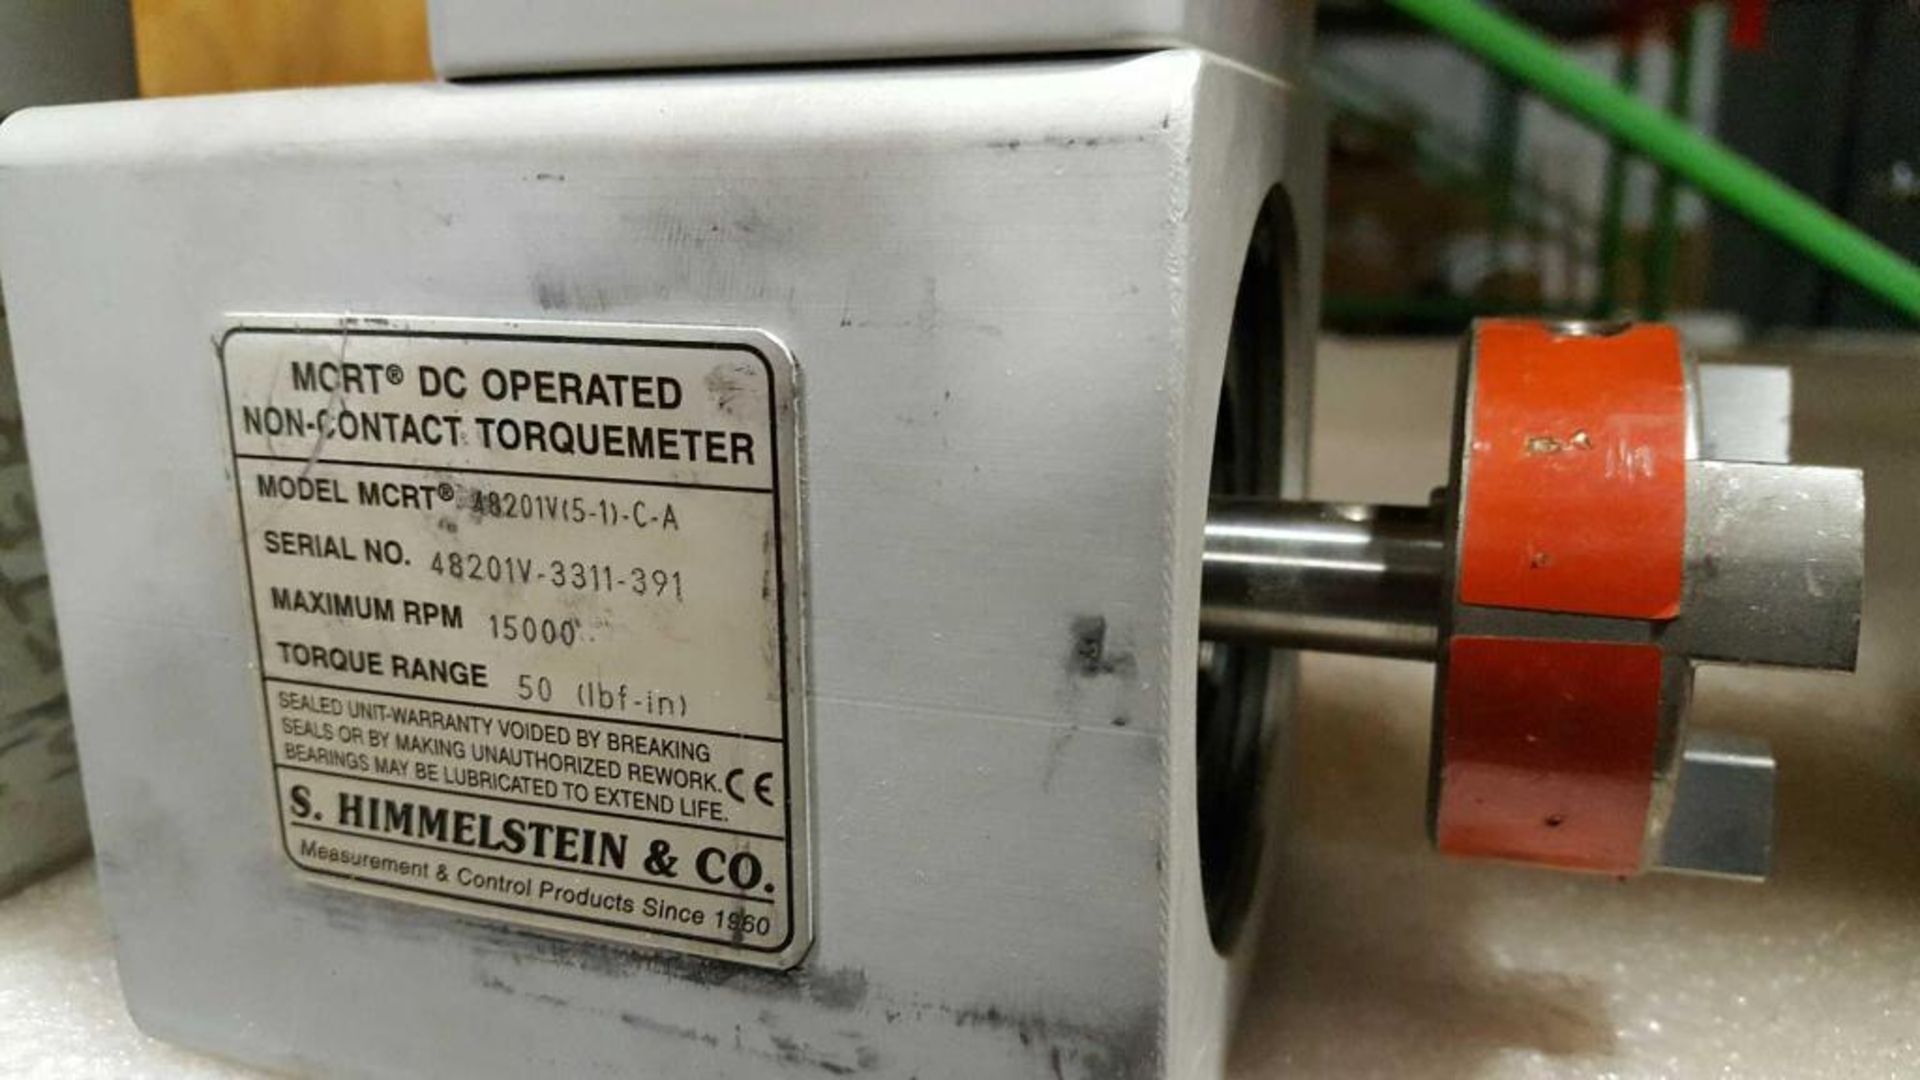 Lot of (3) Hielstein MCRT DC operated non-contact torquemeters, model 48201V(5-1)-C-A - Image 2 of 2